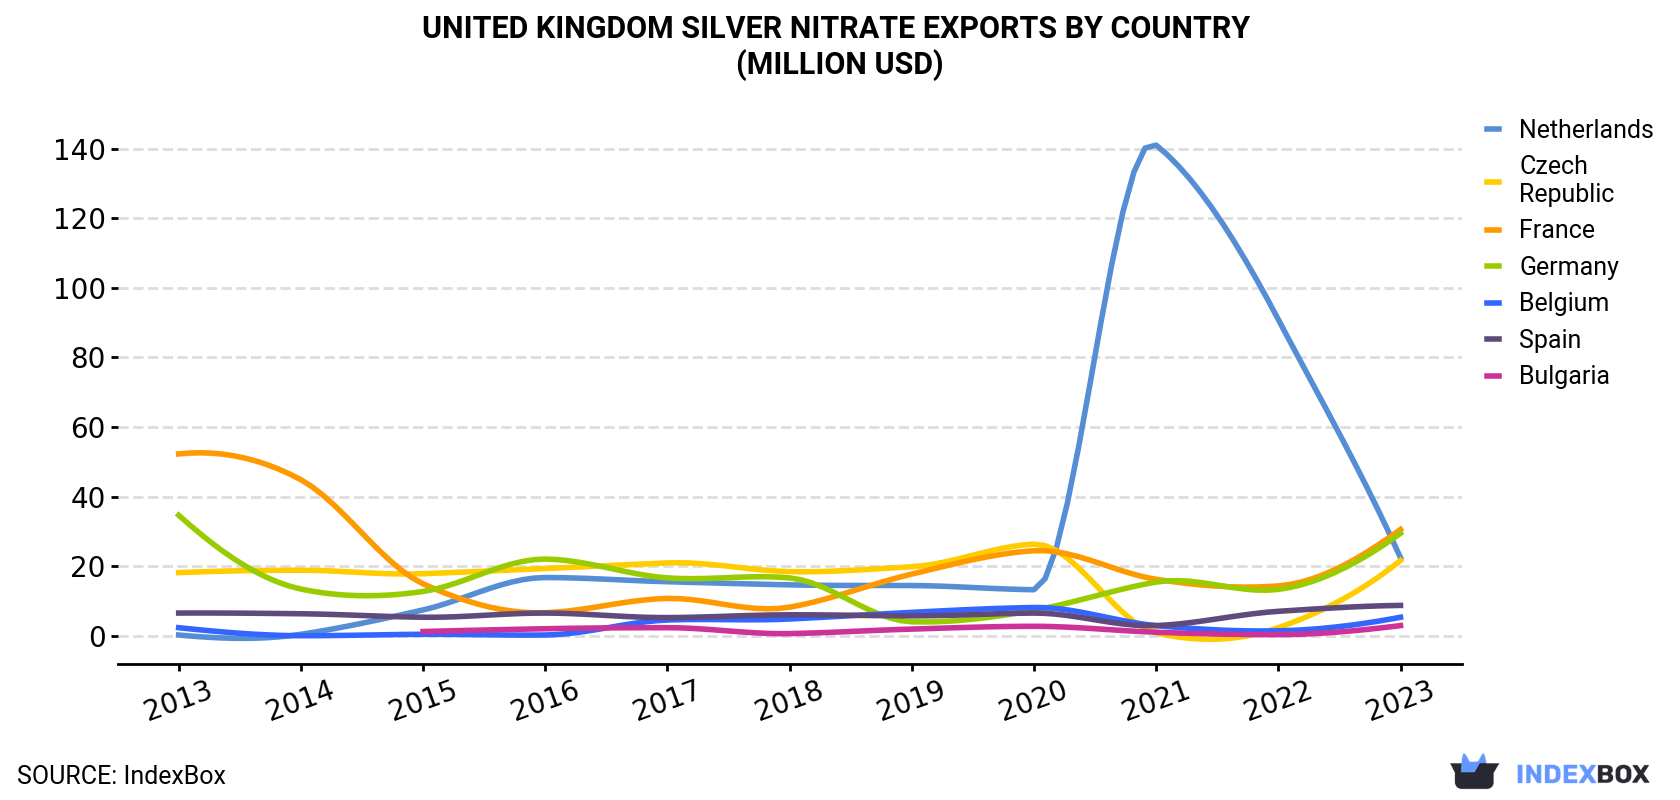 United Kingdom Silver Nitrate Exports By Country (Million USD)